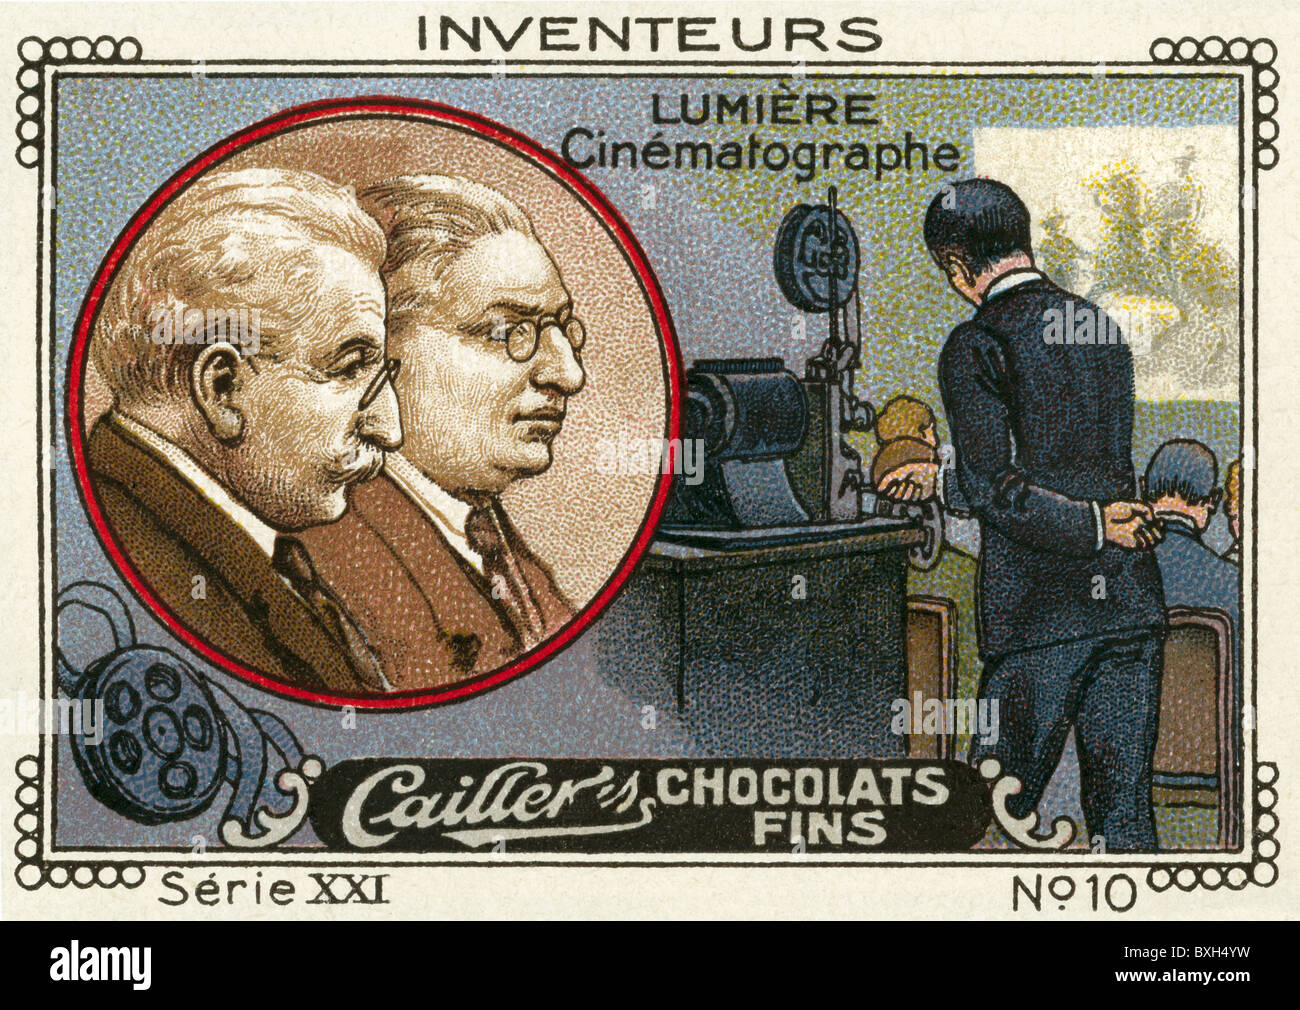 Lumiere, Louis, 5.10.1864 - 6.6.1948, French photographer, with his brother Auguste, inventors of the cinematograph, advertising card, Cailler chocolats fins, lithograph, circa 1914, Stock Photo